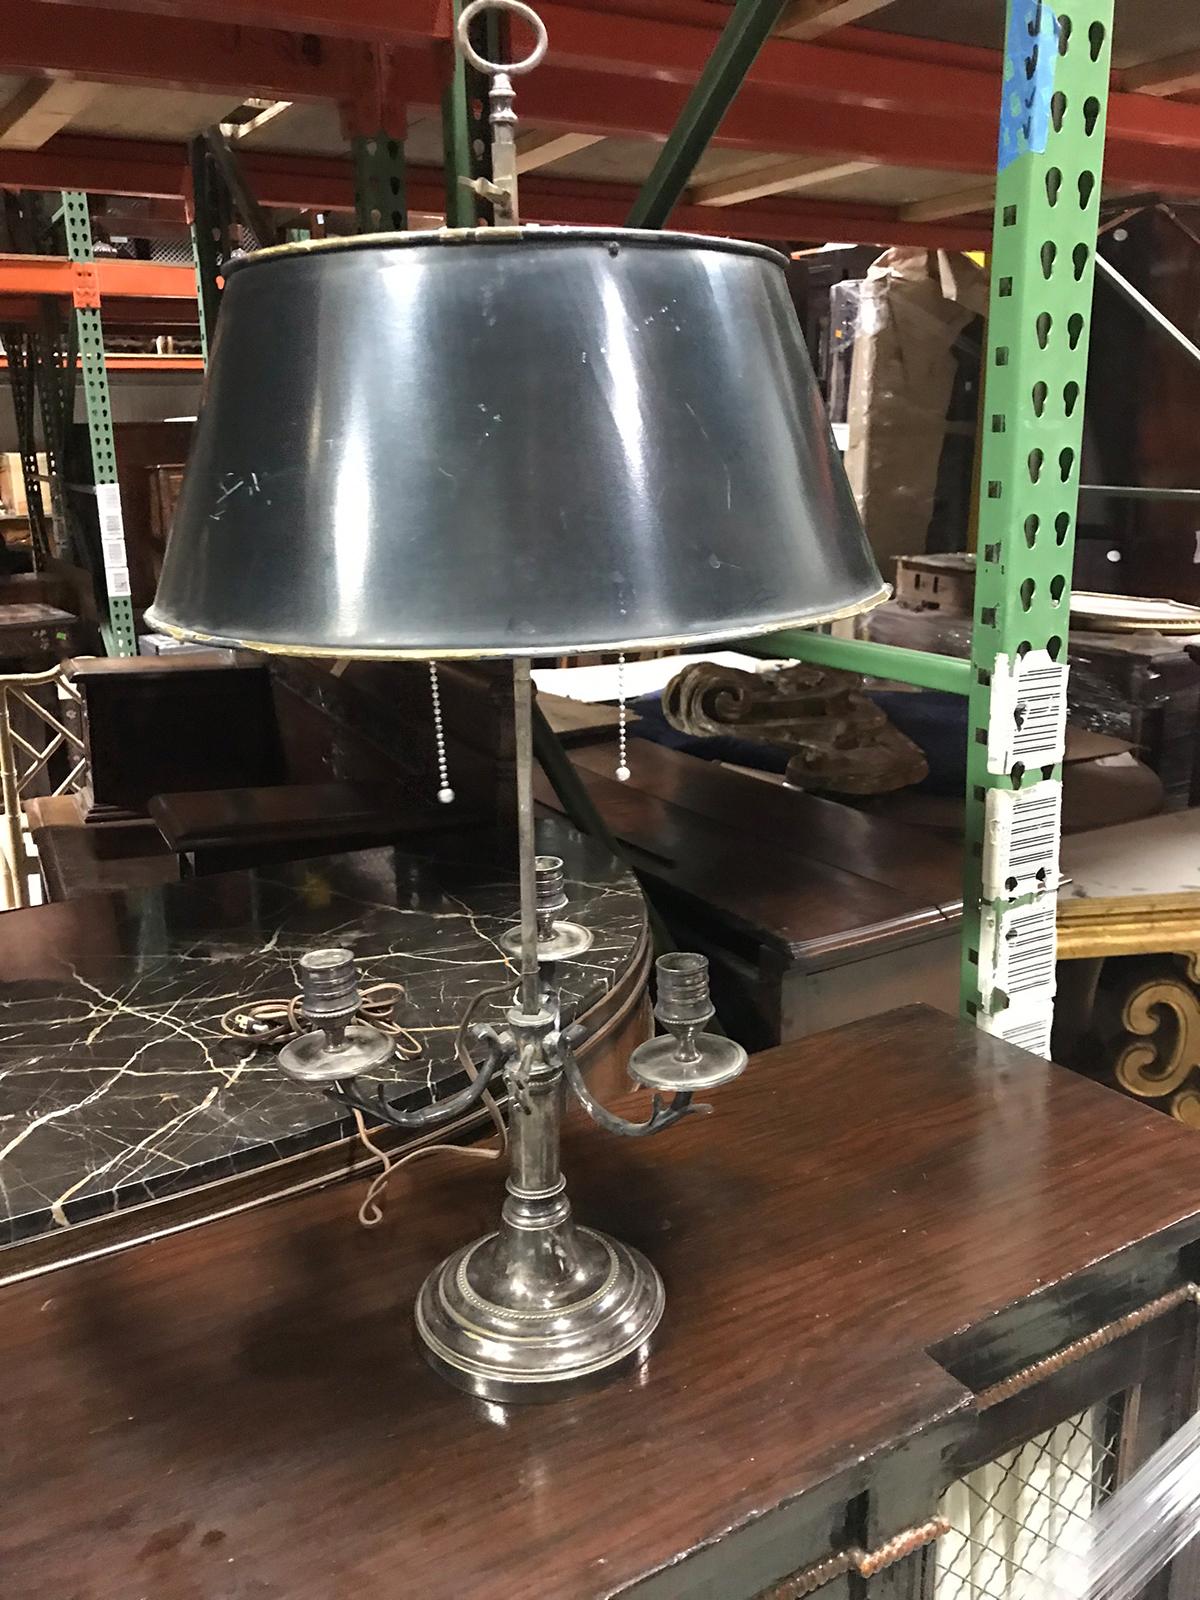 20th century silver Bouillotte lamp with dark green shade
New wiring.